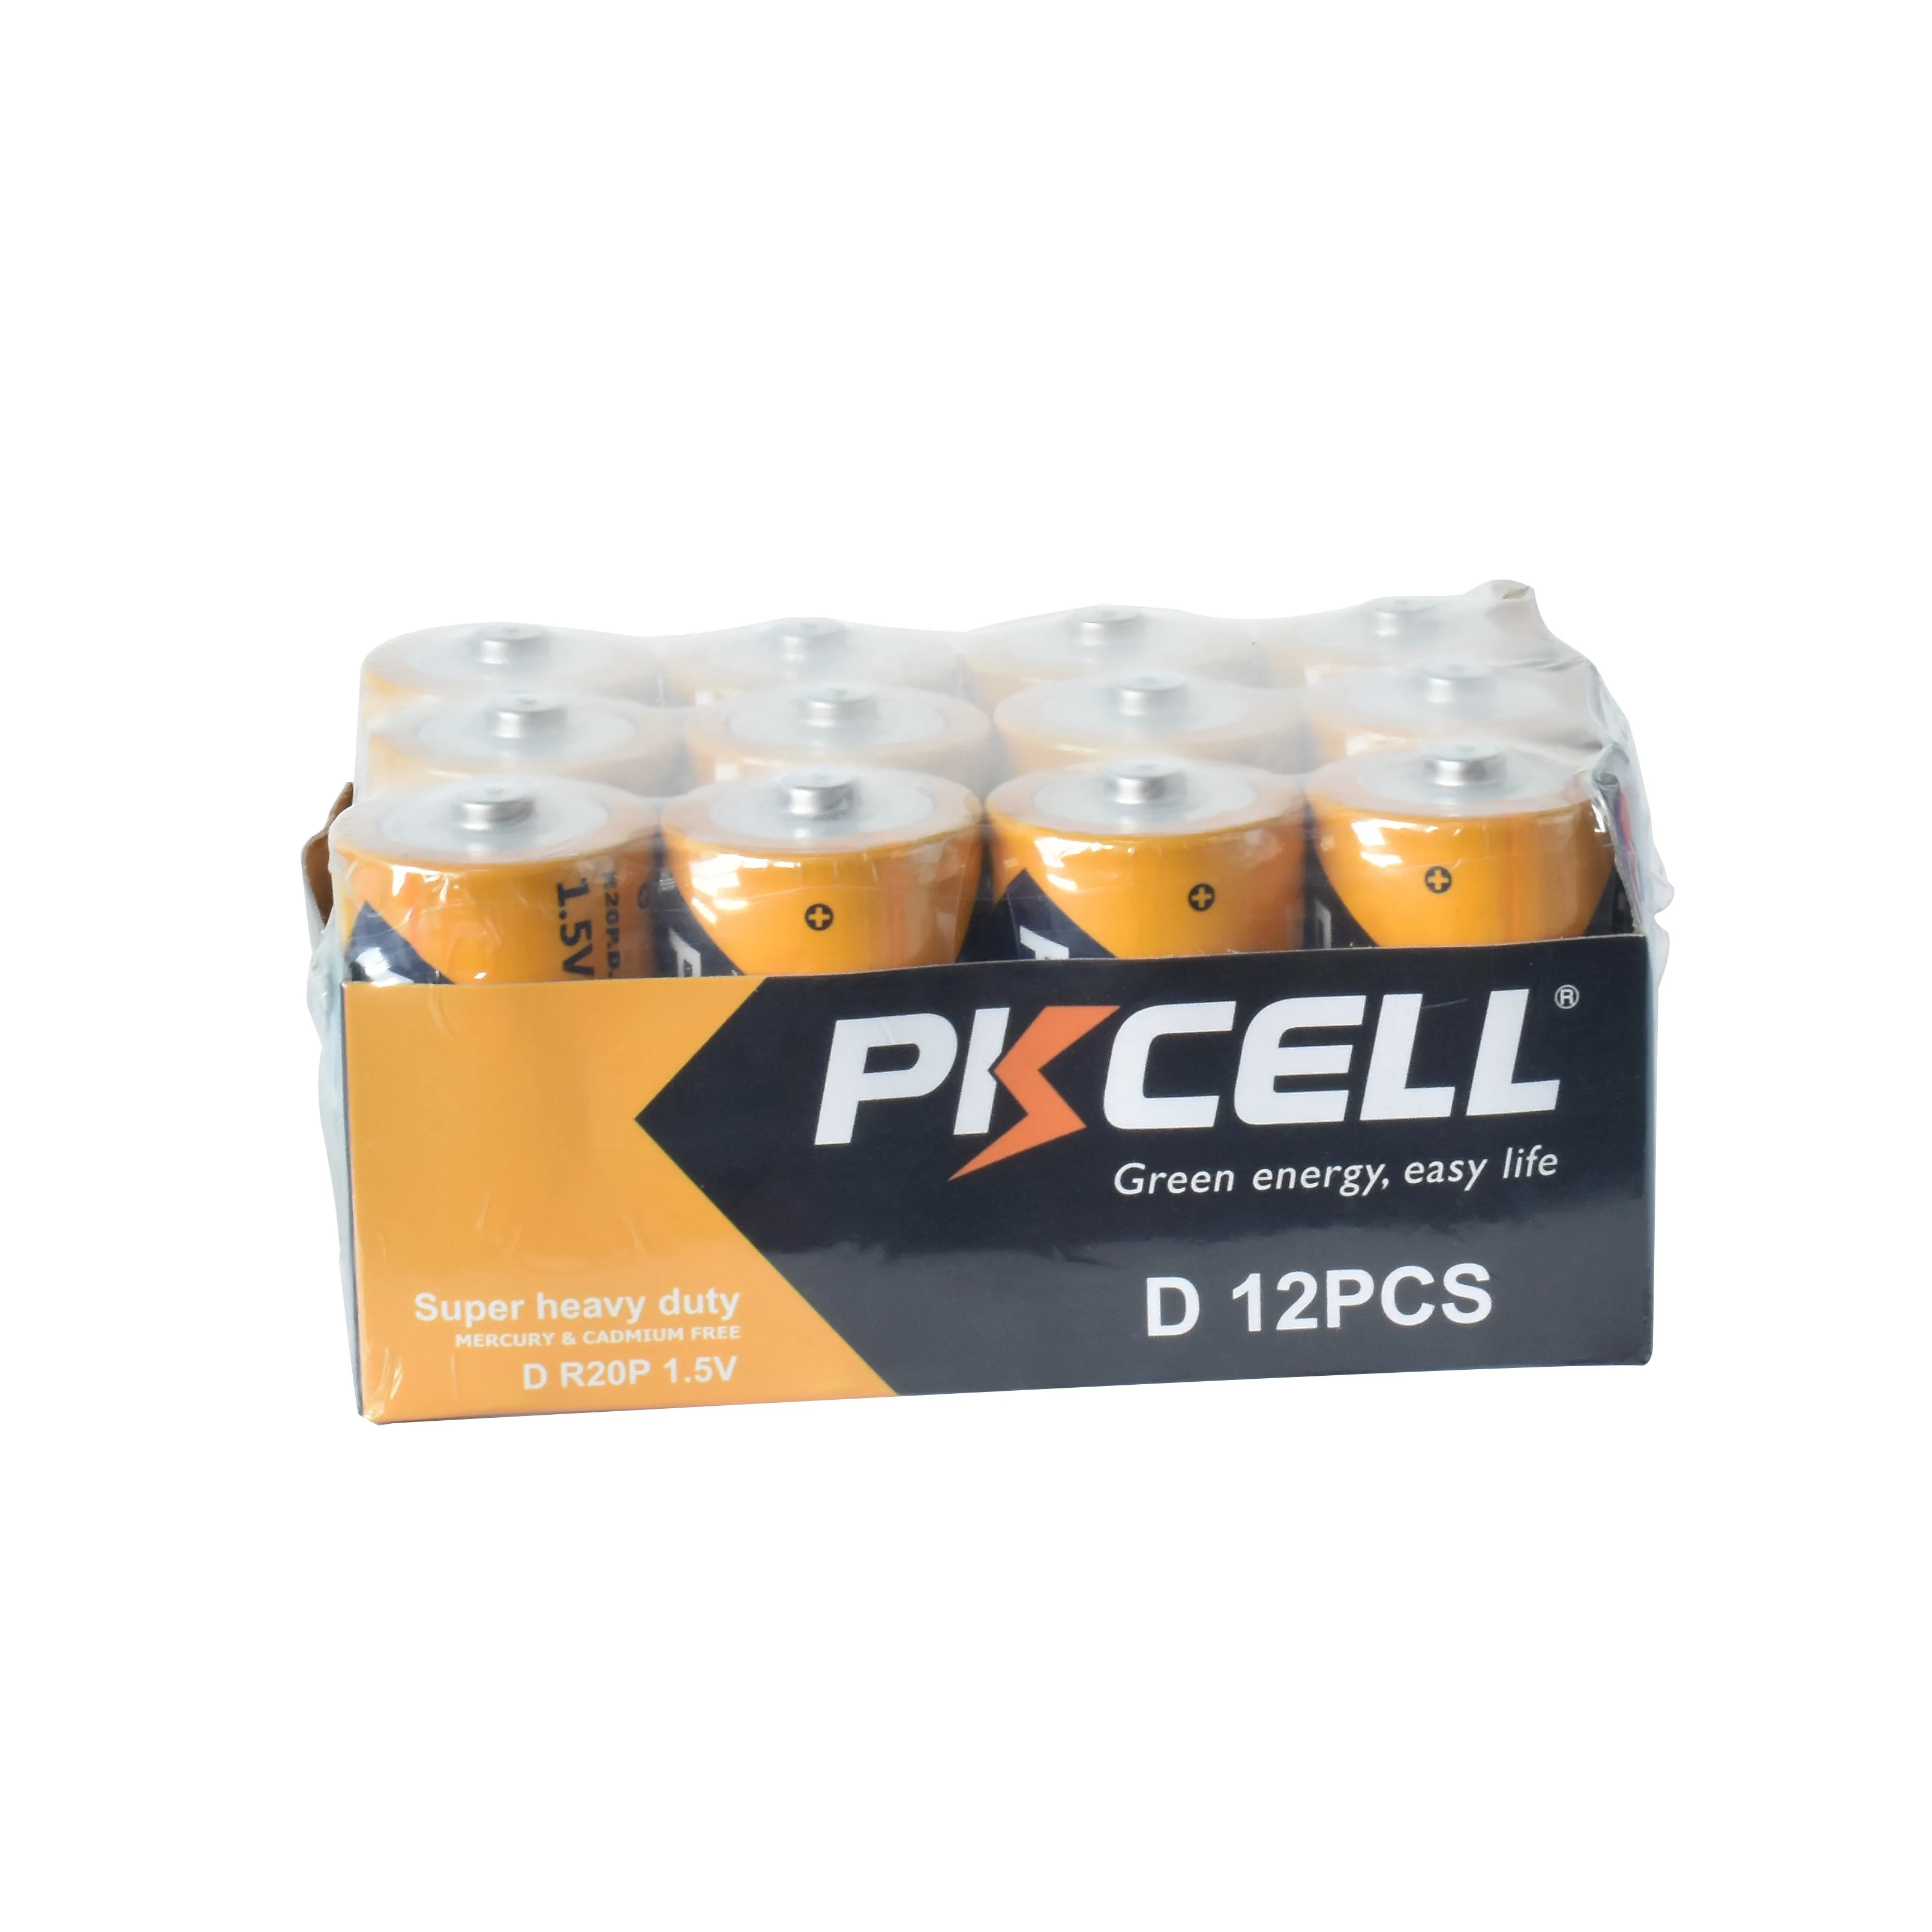 Pkcell carbon zinc r20p d battery for camping light outdoor torch